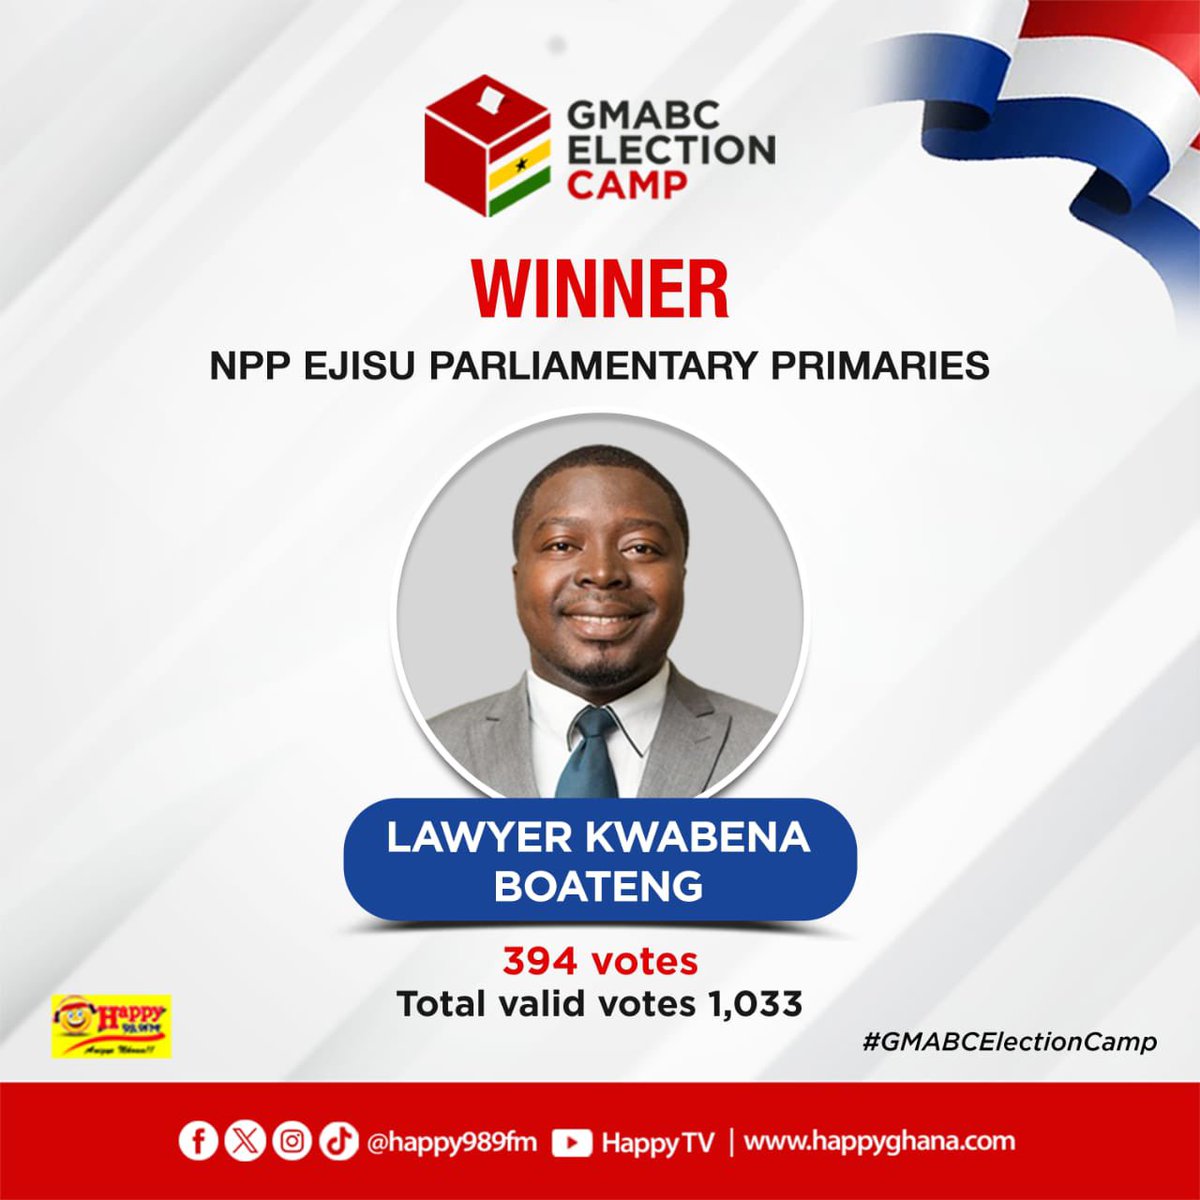 NPP Ejisu Parliamentary Primaries: 

Lawyer Kwabena Boateng wins contest with 394 votes out of 1,033 valid votes 

#EjisuNPPDecides 
#GMABCElectionCamp 
#HappyGhana